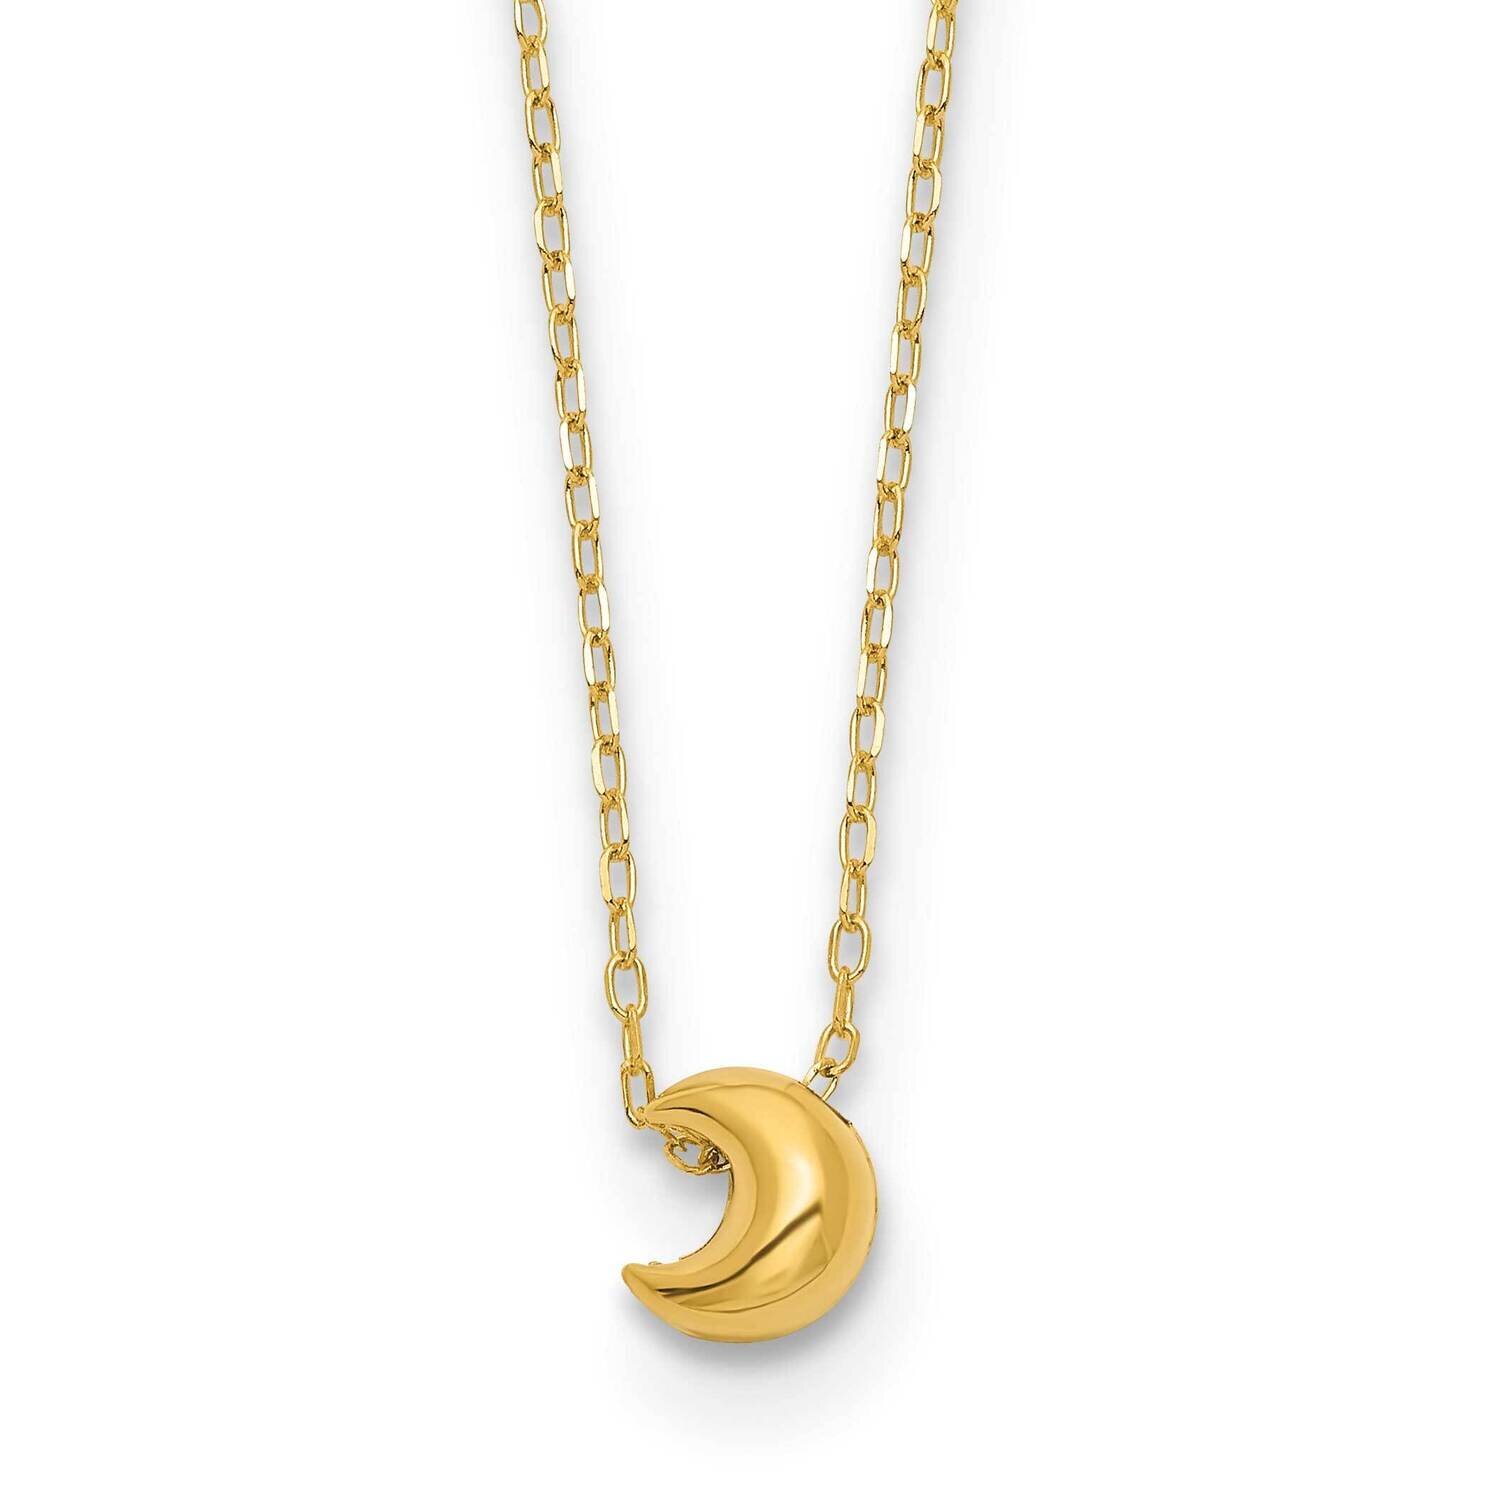 Puffed Moon 16.5 Inch Necklace 14k Gold Polished SF2899-16.5